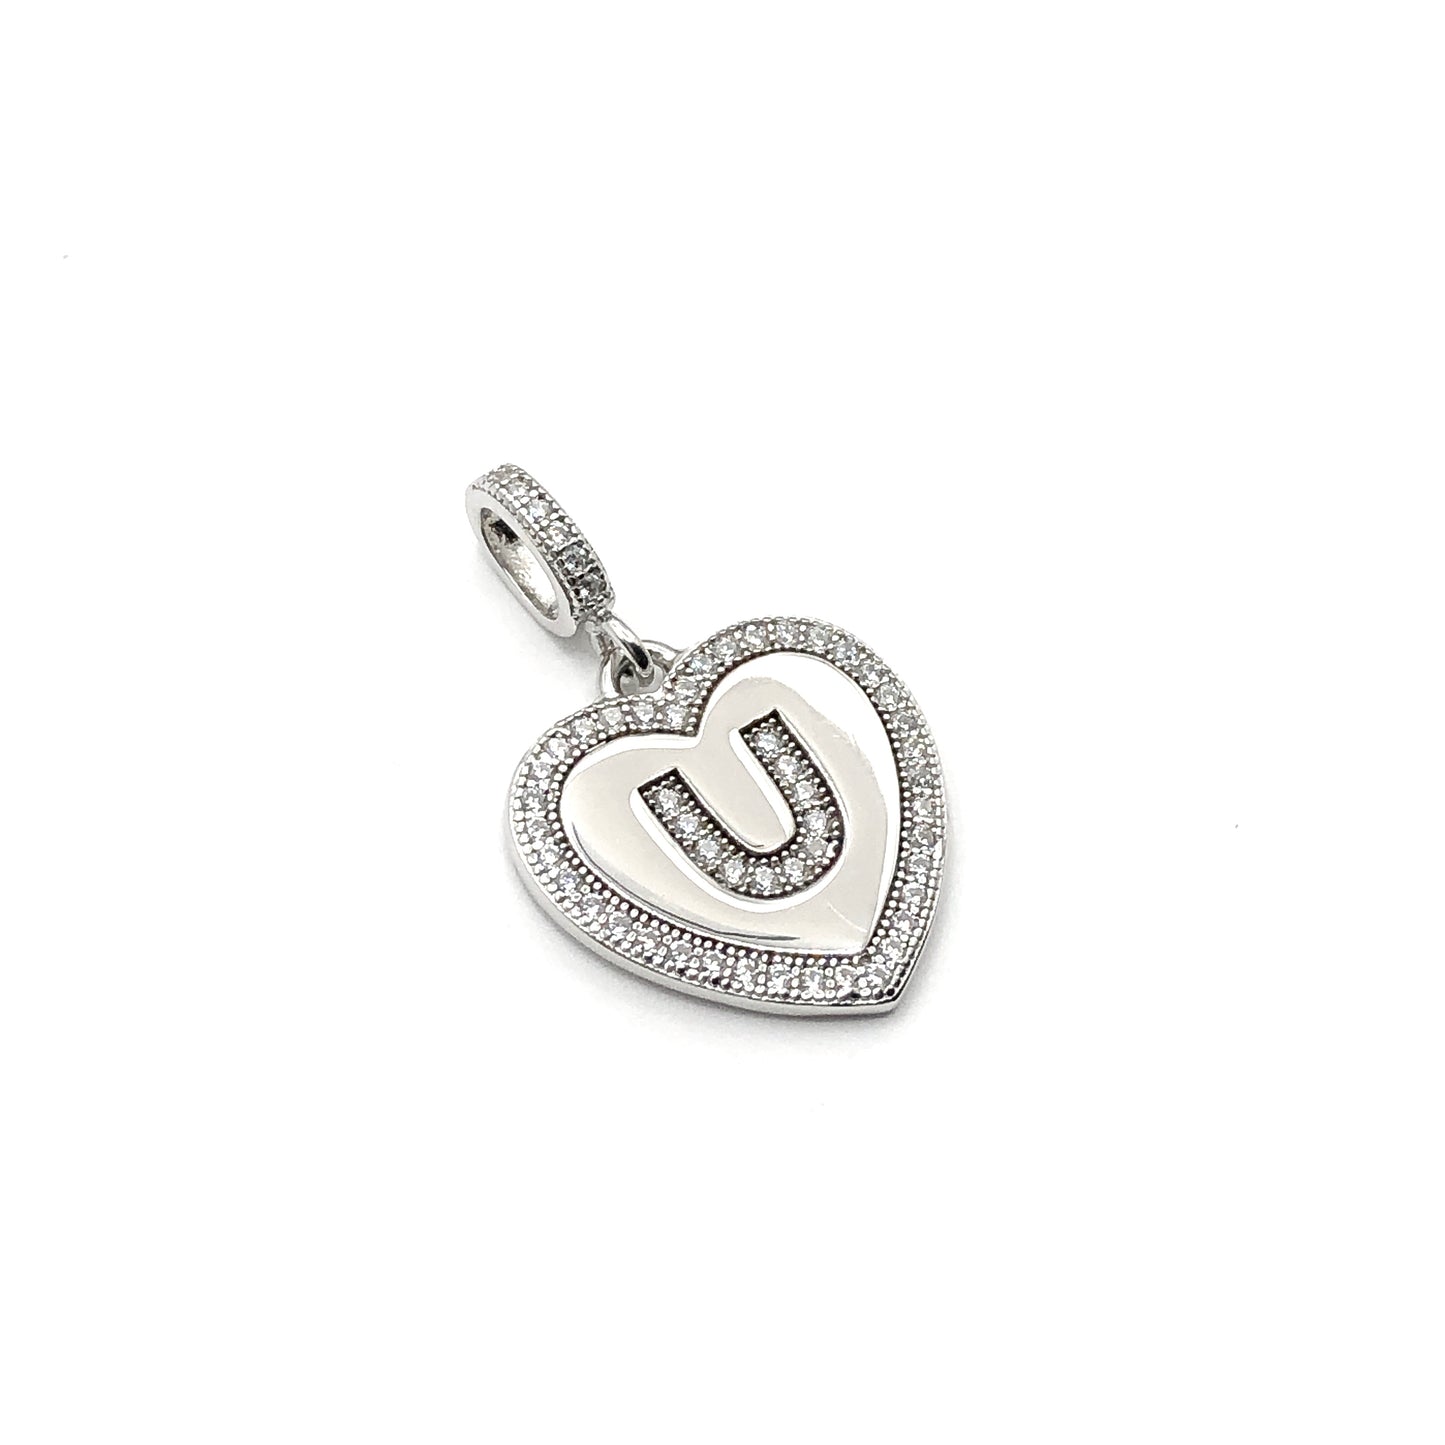 Statement Jewelry | Love You | Pre owned Sterling Cz Trimmed Heart Pendant | Silver Heart Charm | 925 Silver